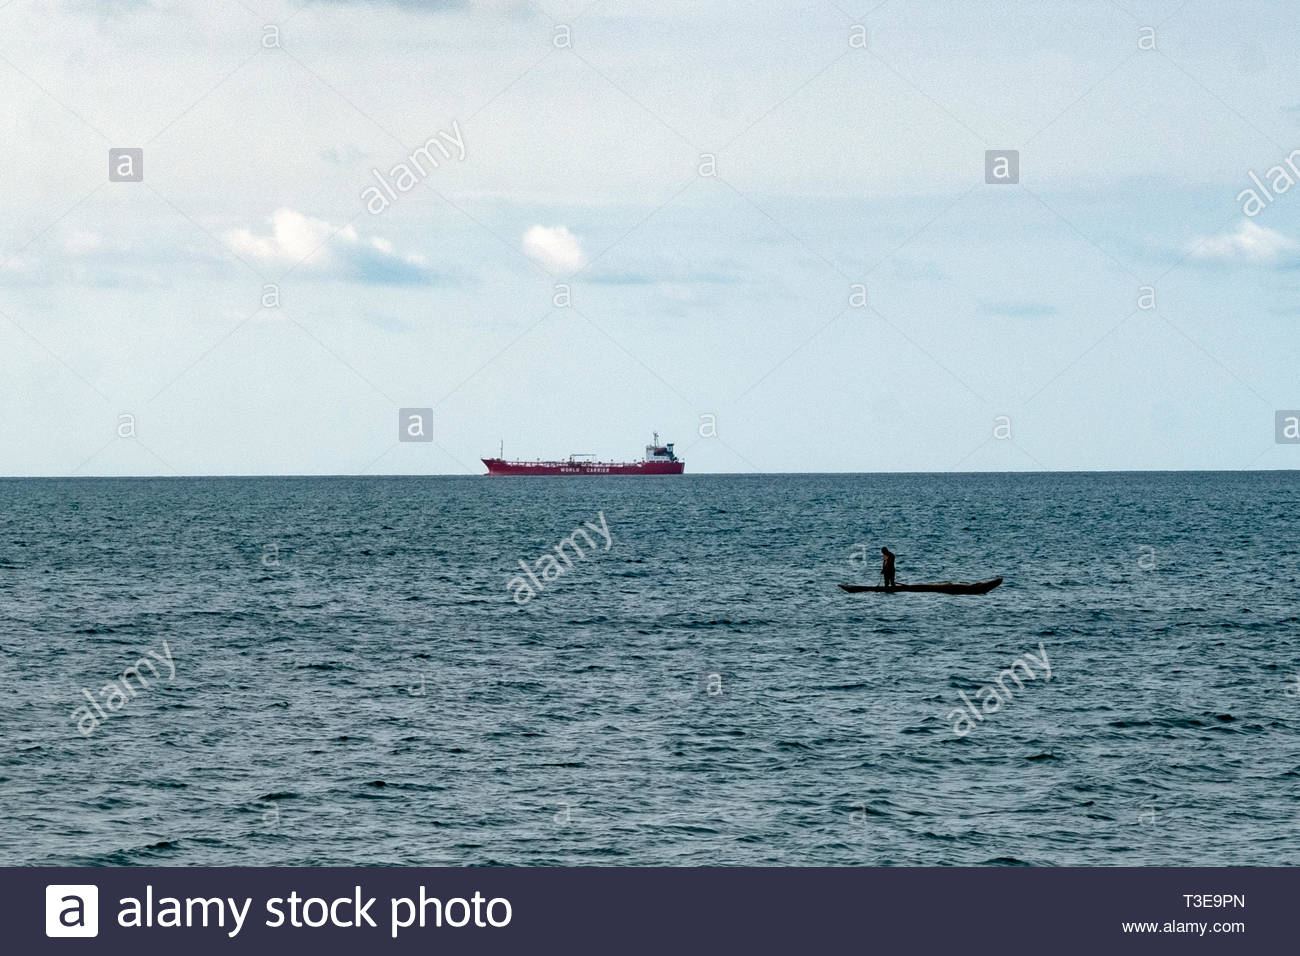 A Fisherman In Dugout Canoe Tends His S With Large Ship